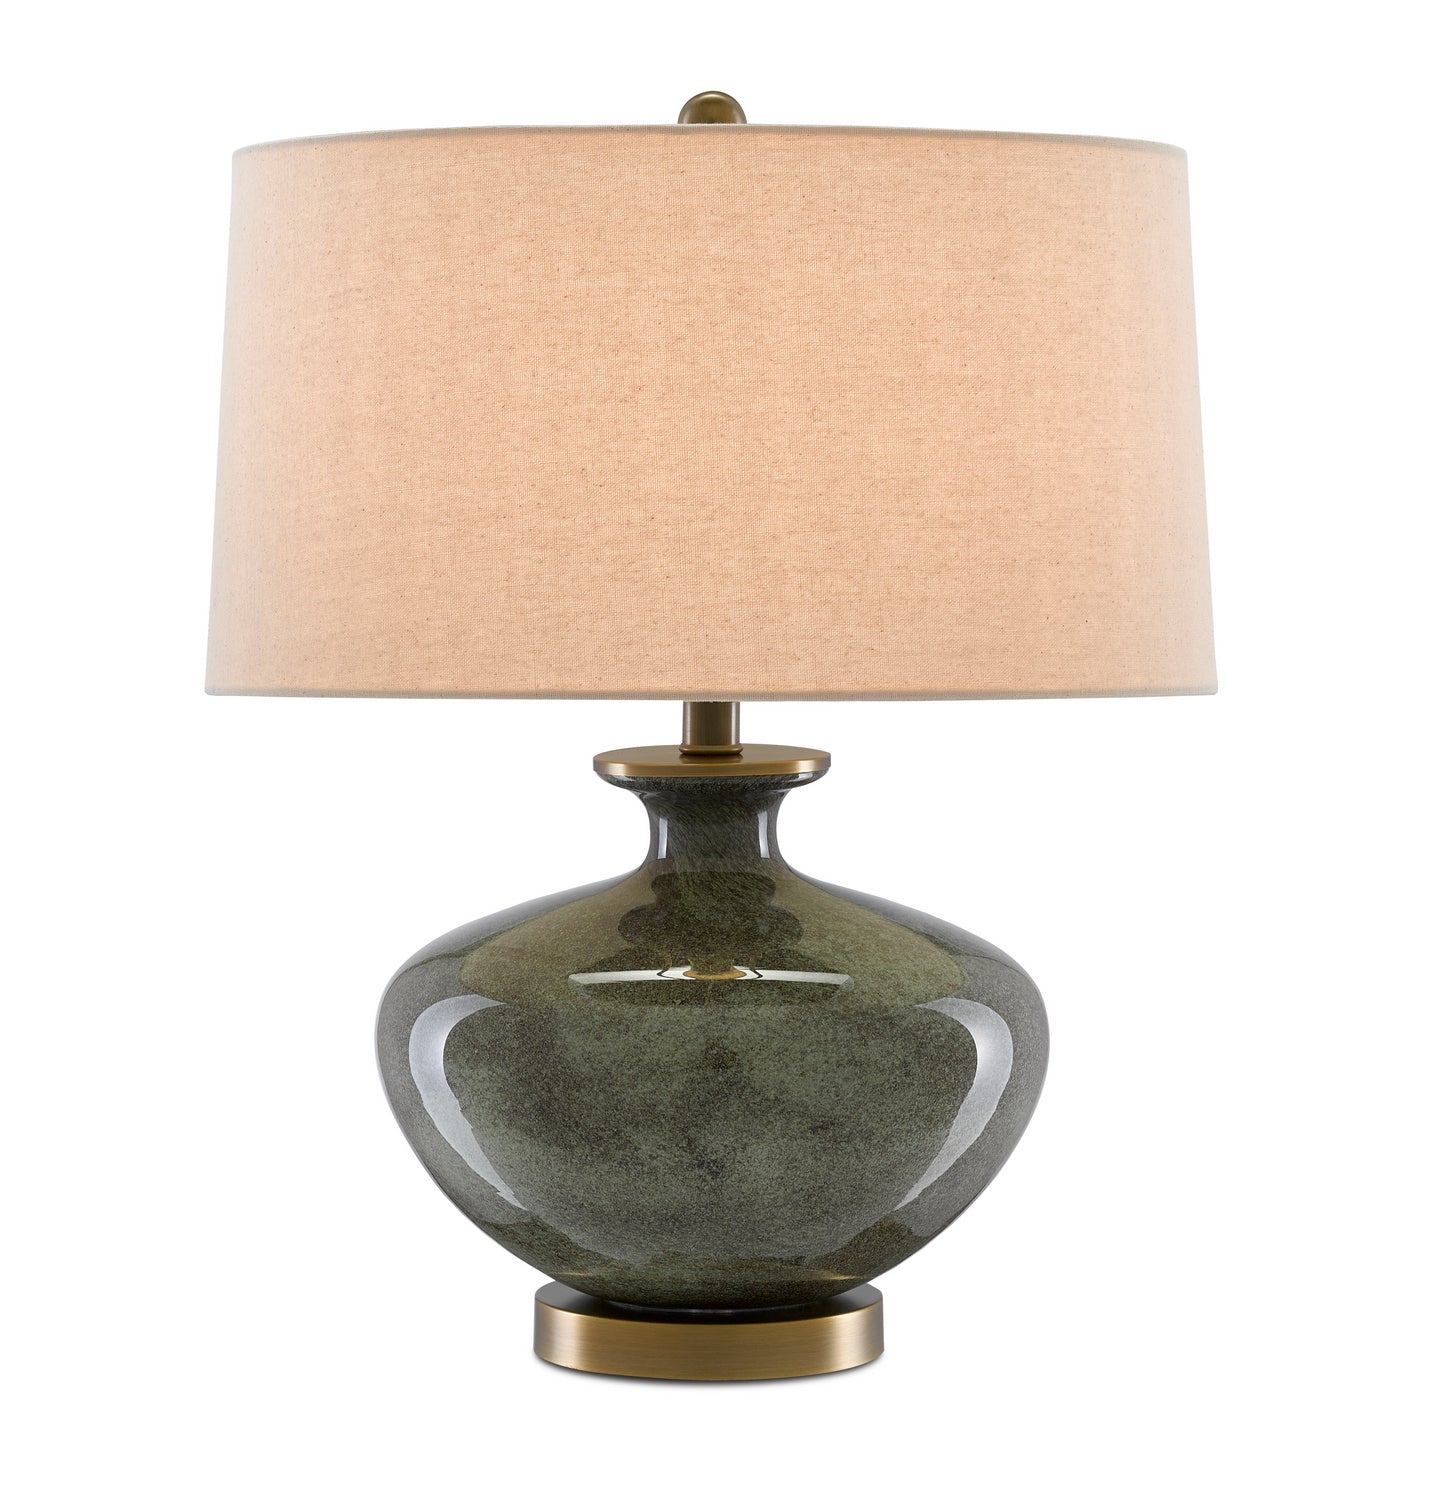 One Light Table Lamp from the Greenlea collection in Dark Gray/Moss Green/Antique Brass finish